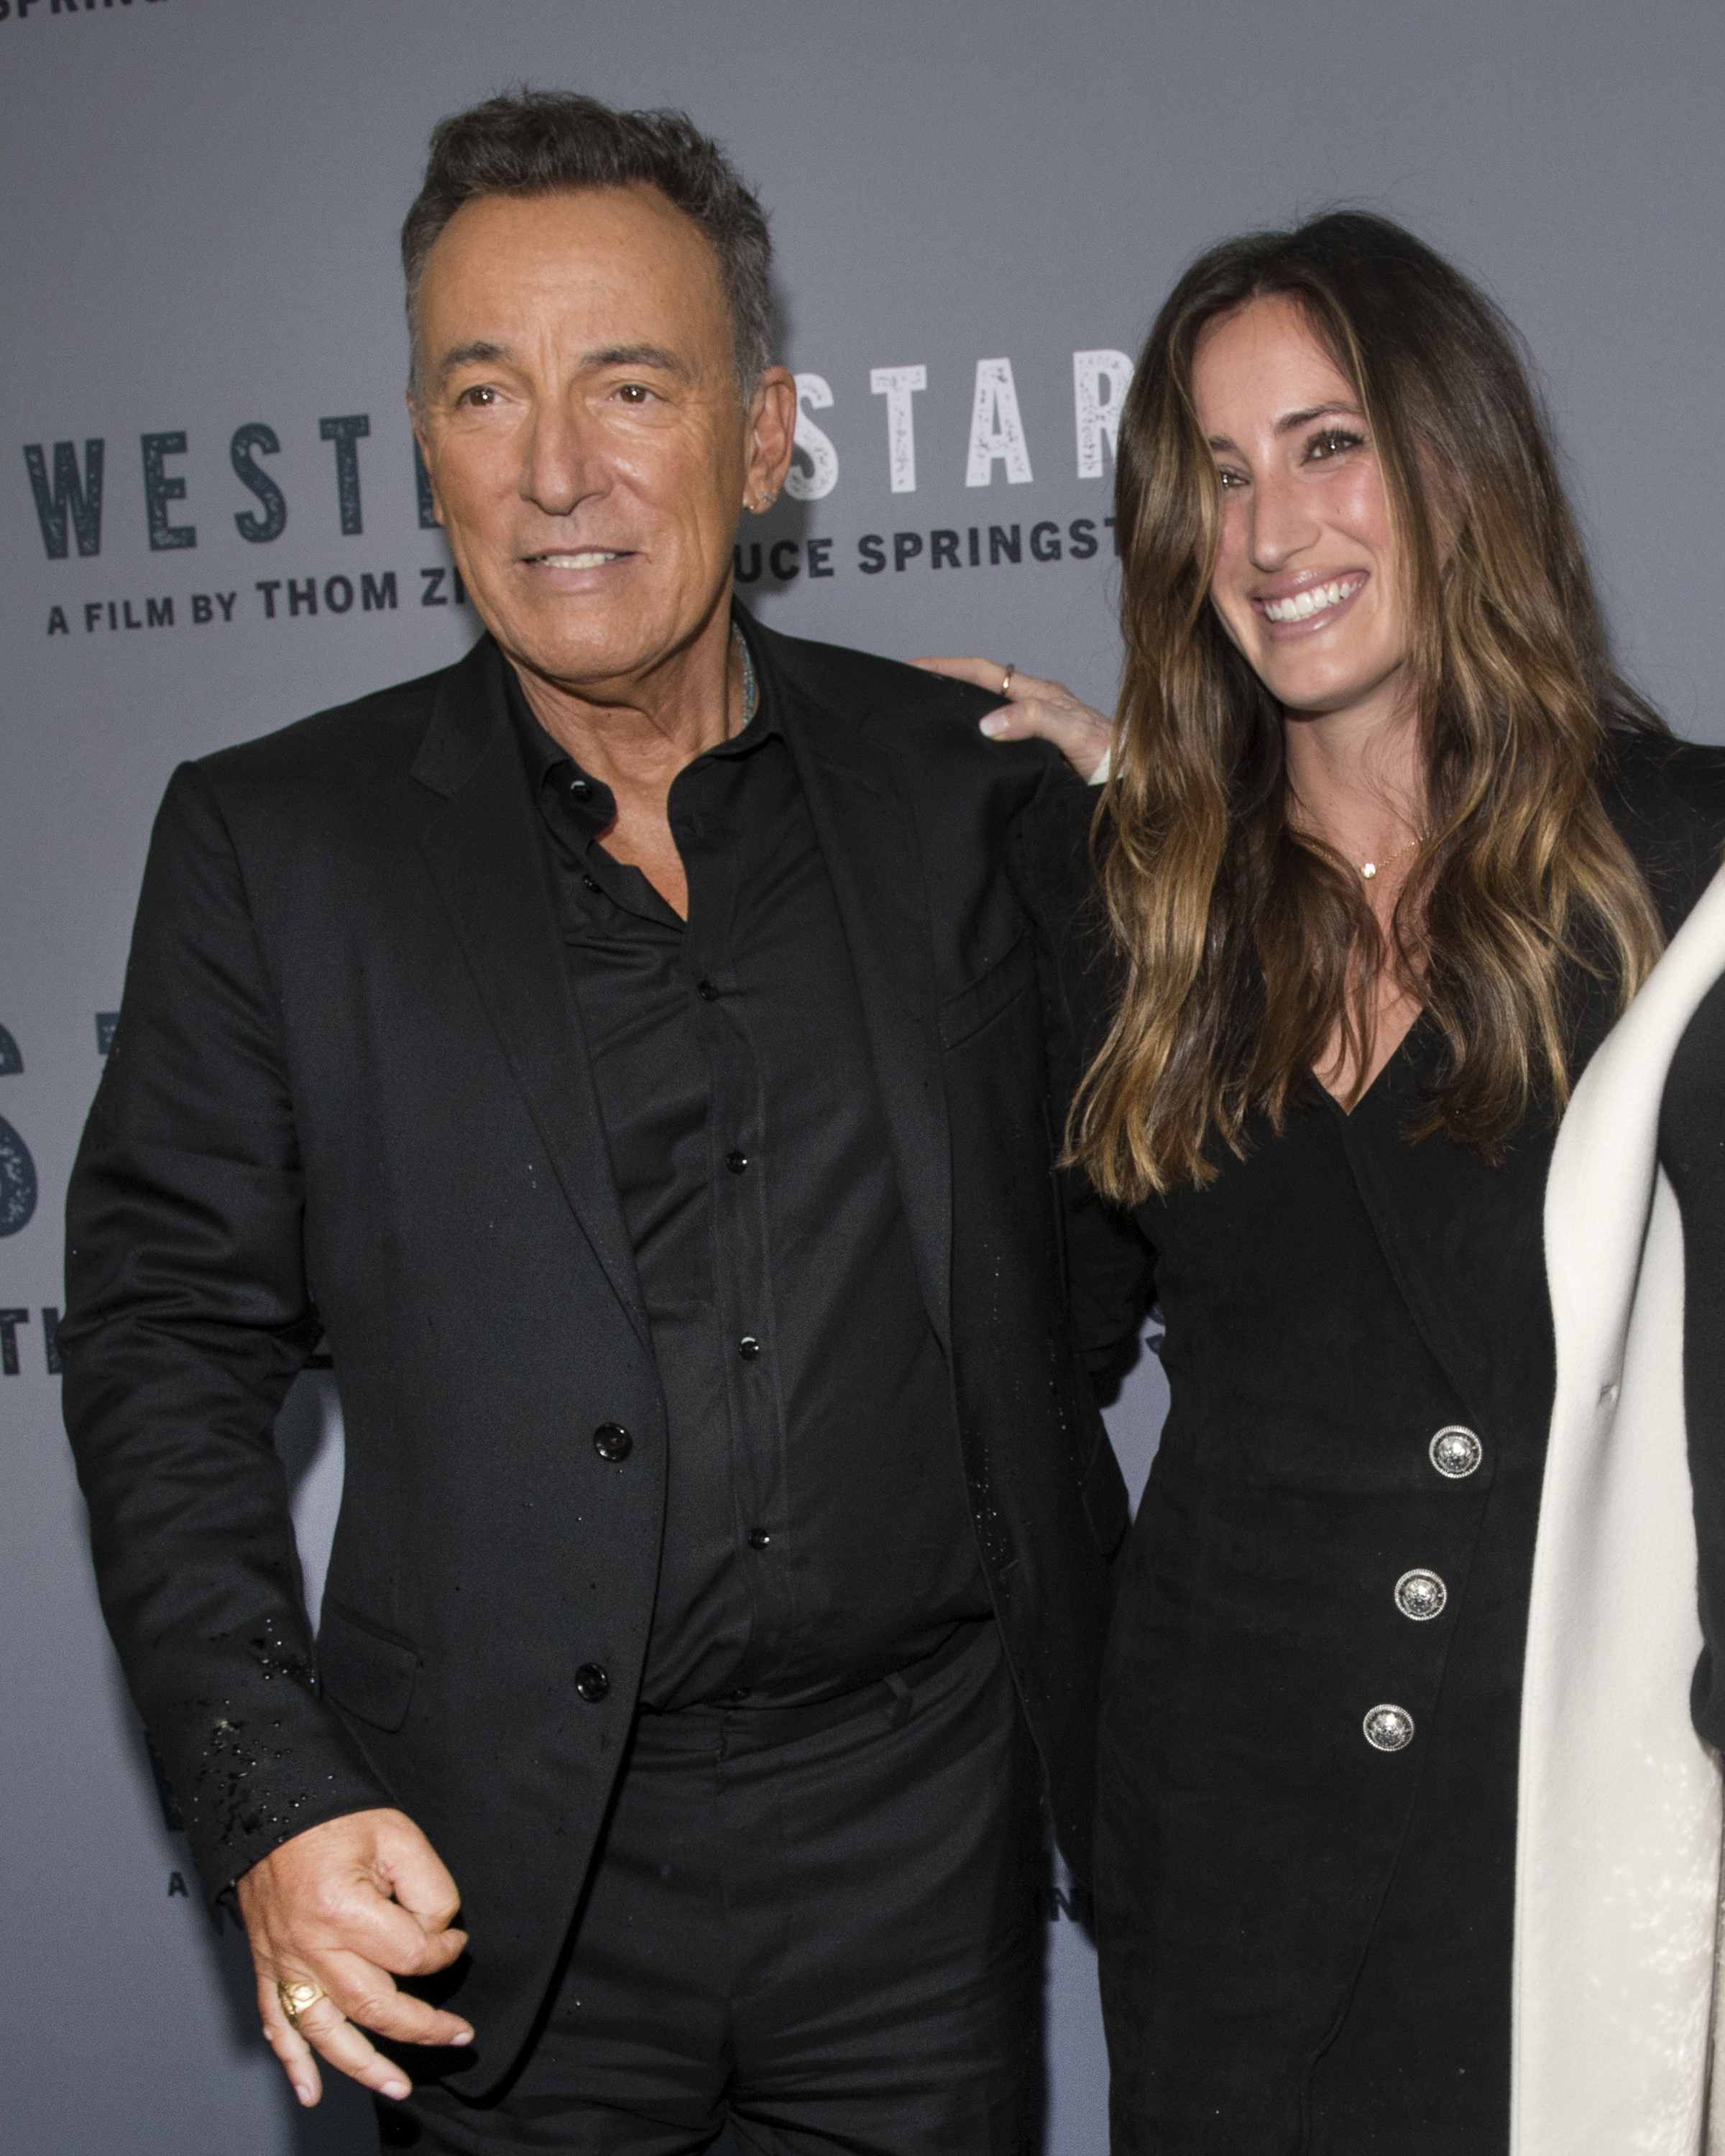 Bruce Springsteen and Jessica Springsteen in New York City on October 16, 2019 | Source: Getty Images